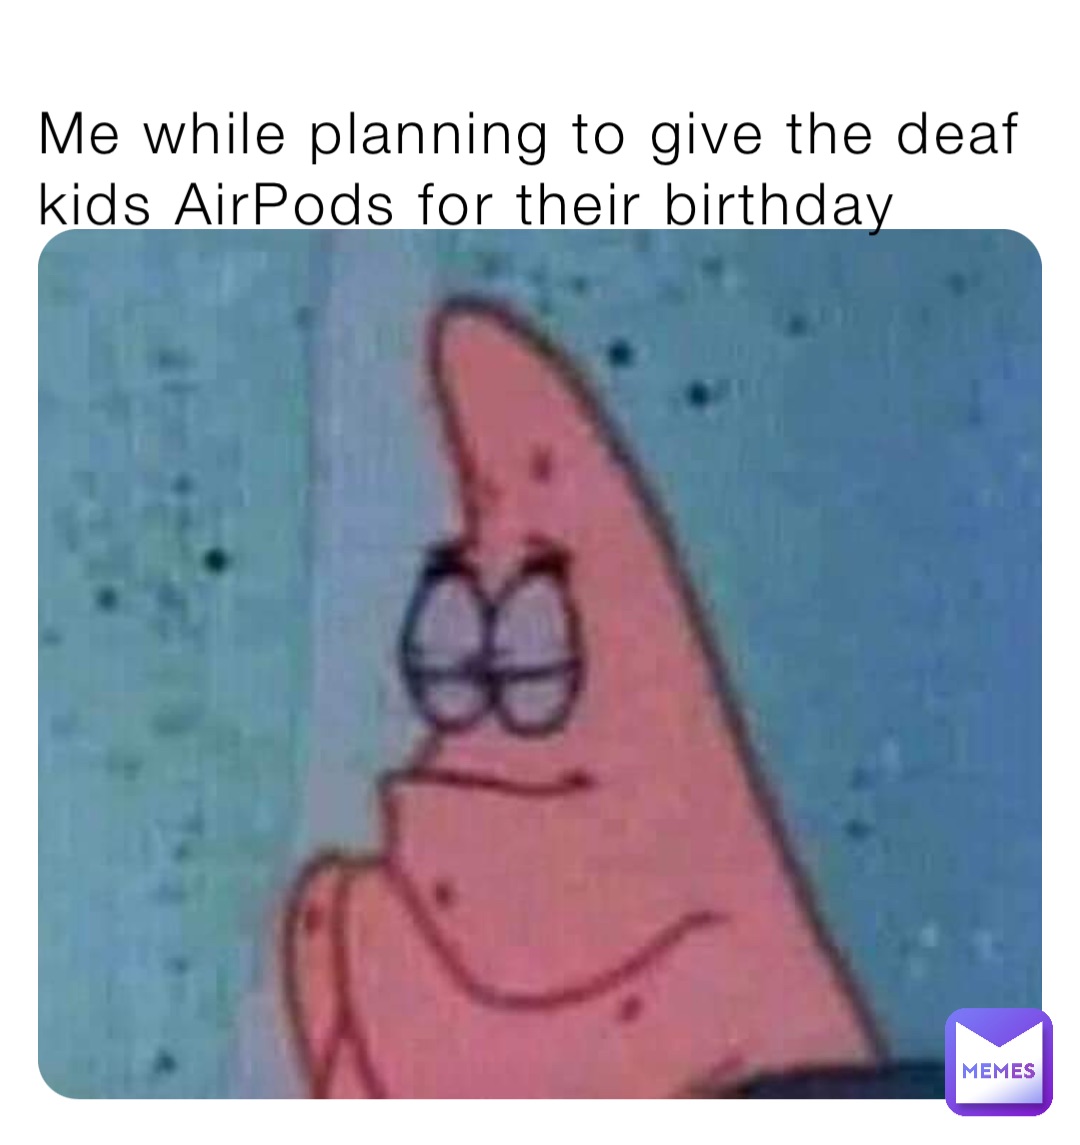 Me while planning to give the deaf kids AirPods for their birthday